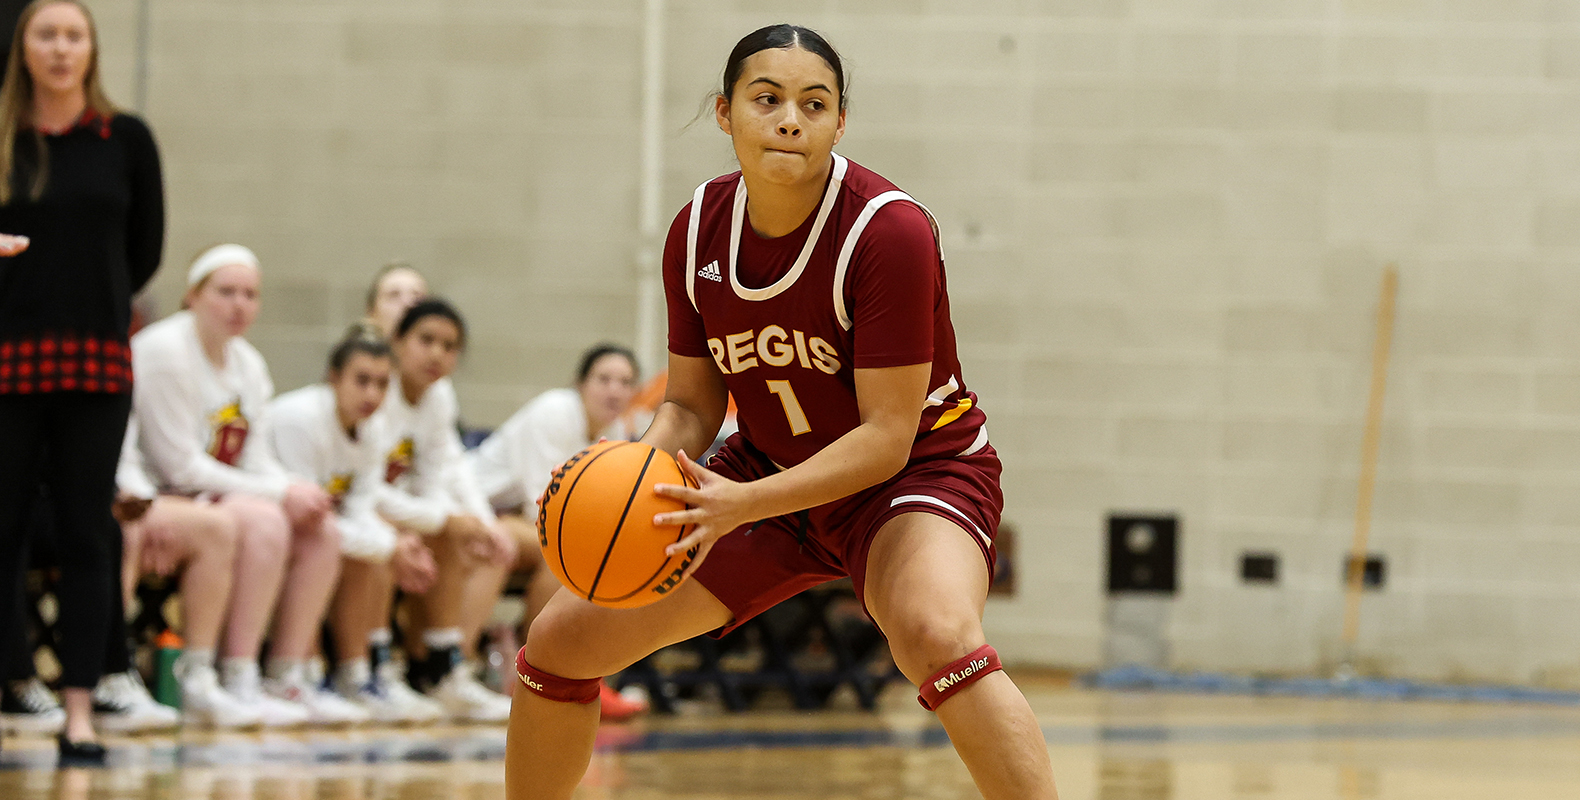 Women's Basketball Scores Season-High 92 Points in Victory over Dean